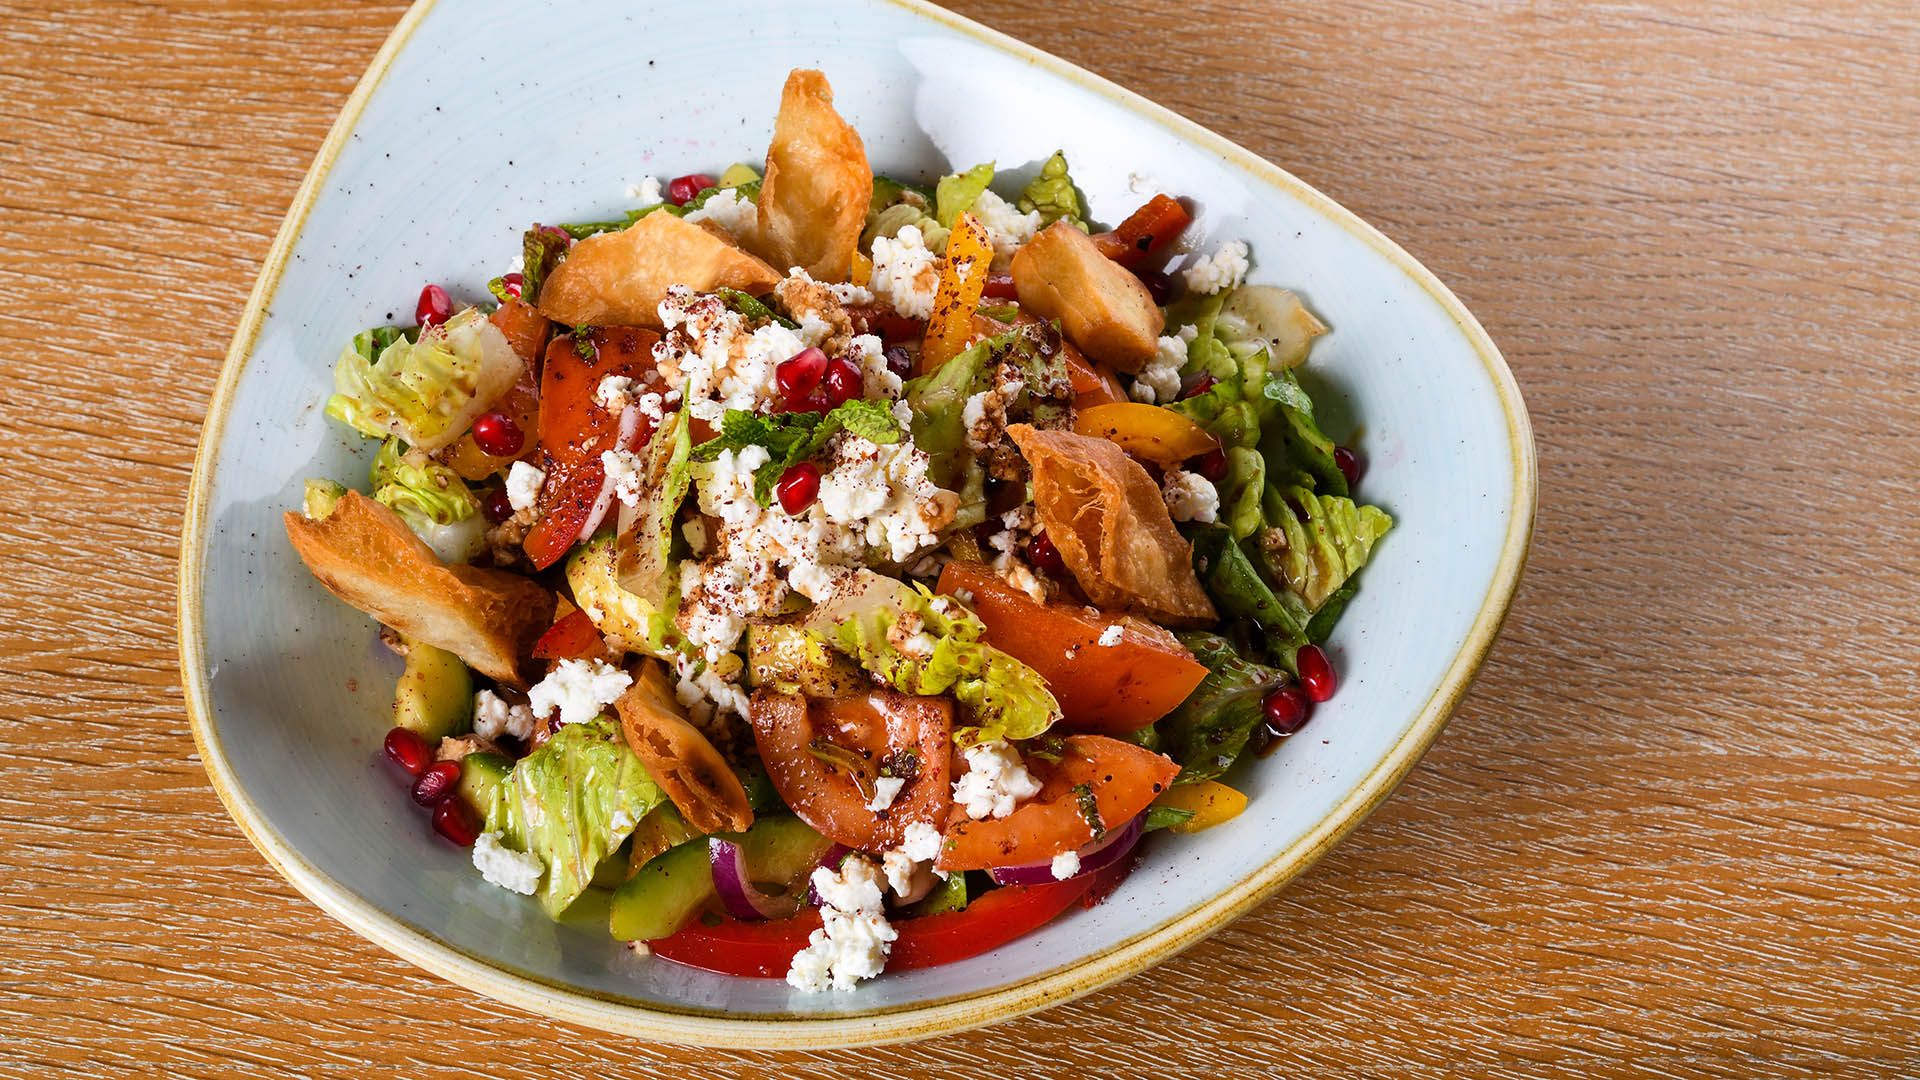 Fattoush is a Levantine salad made from toasted or fried pieces of khubz combined with mixed greens and other vegetables © Cristina.A/Shutterstock